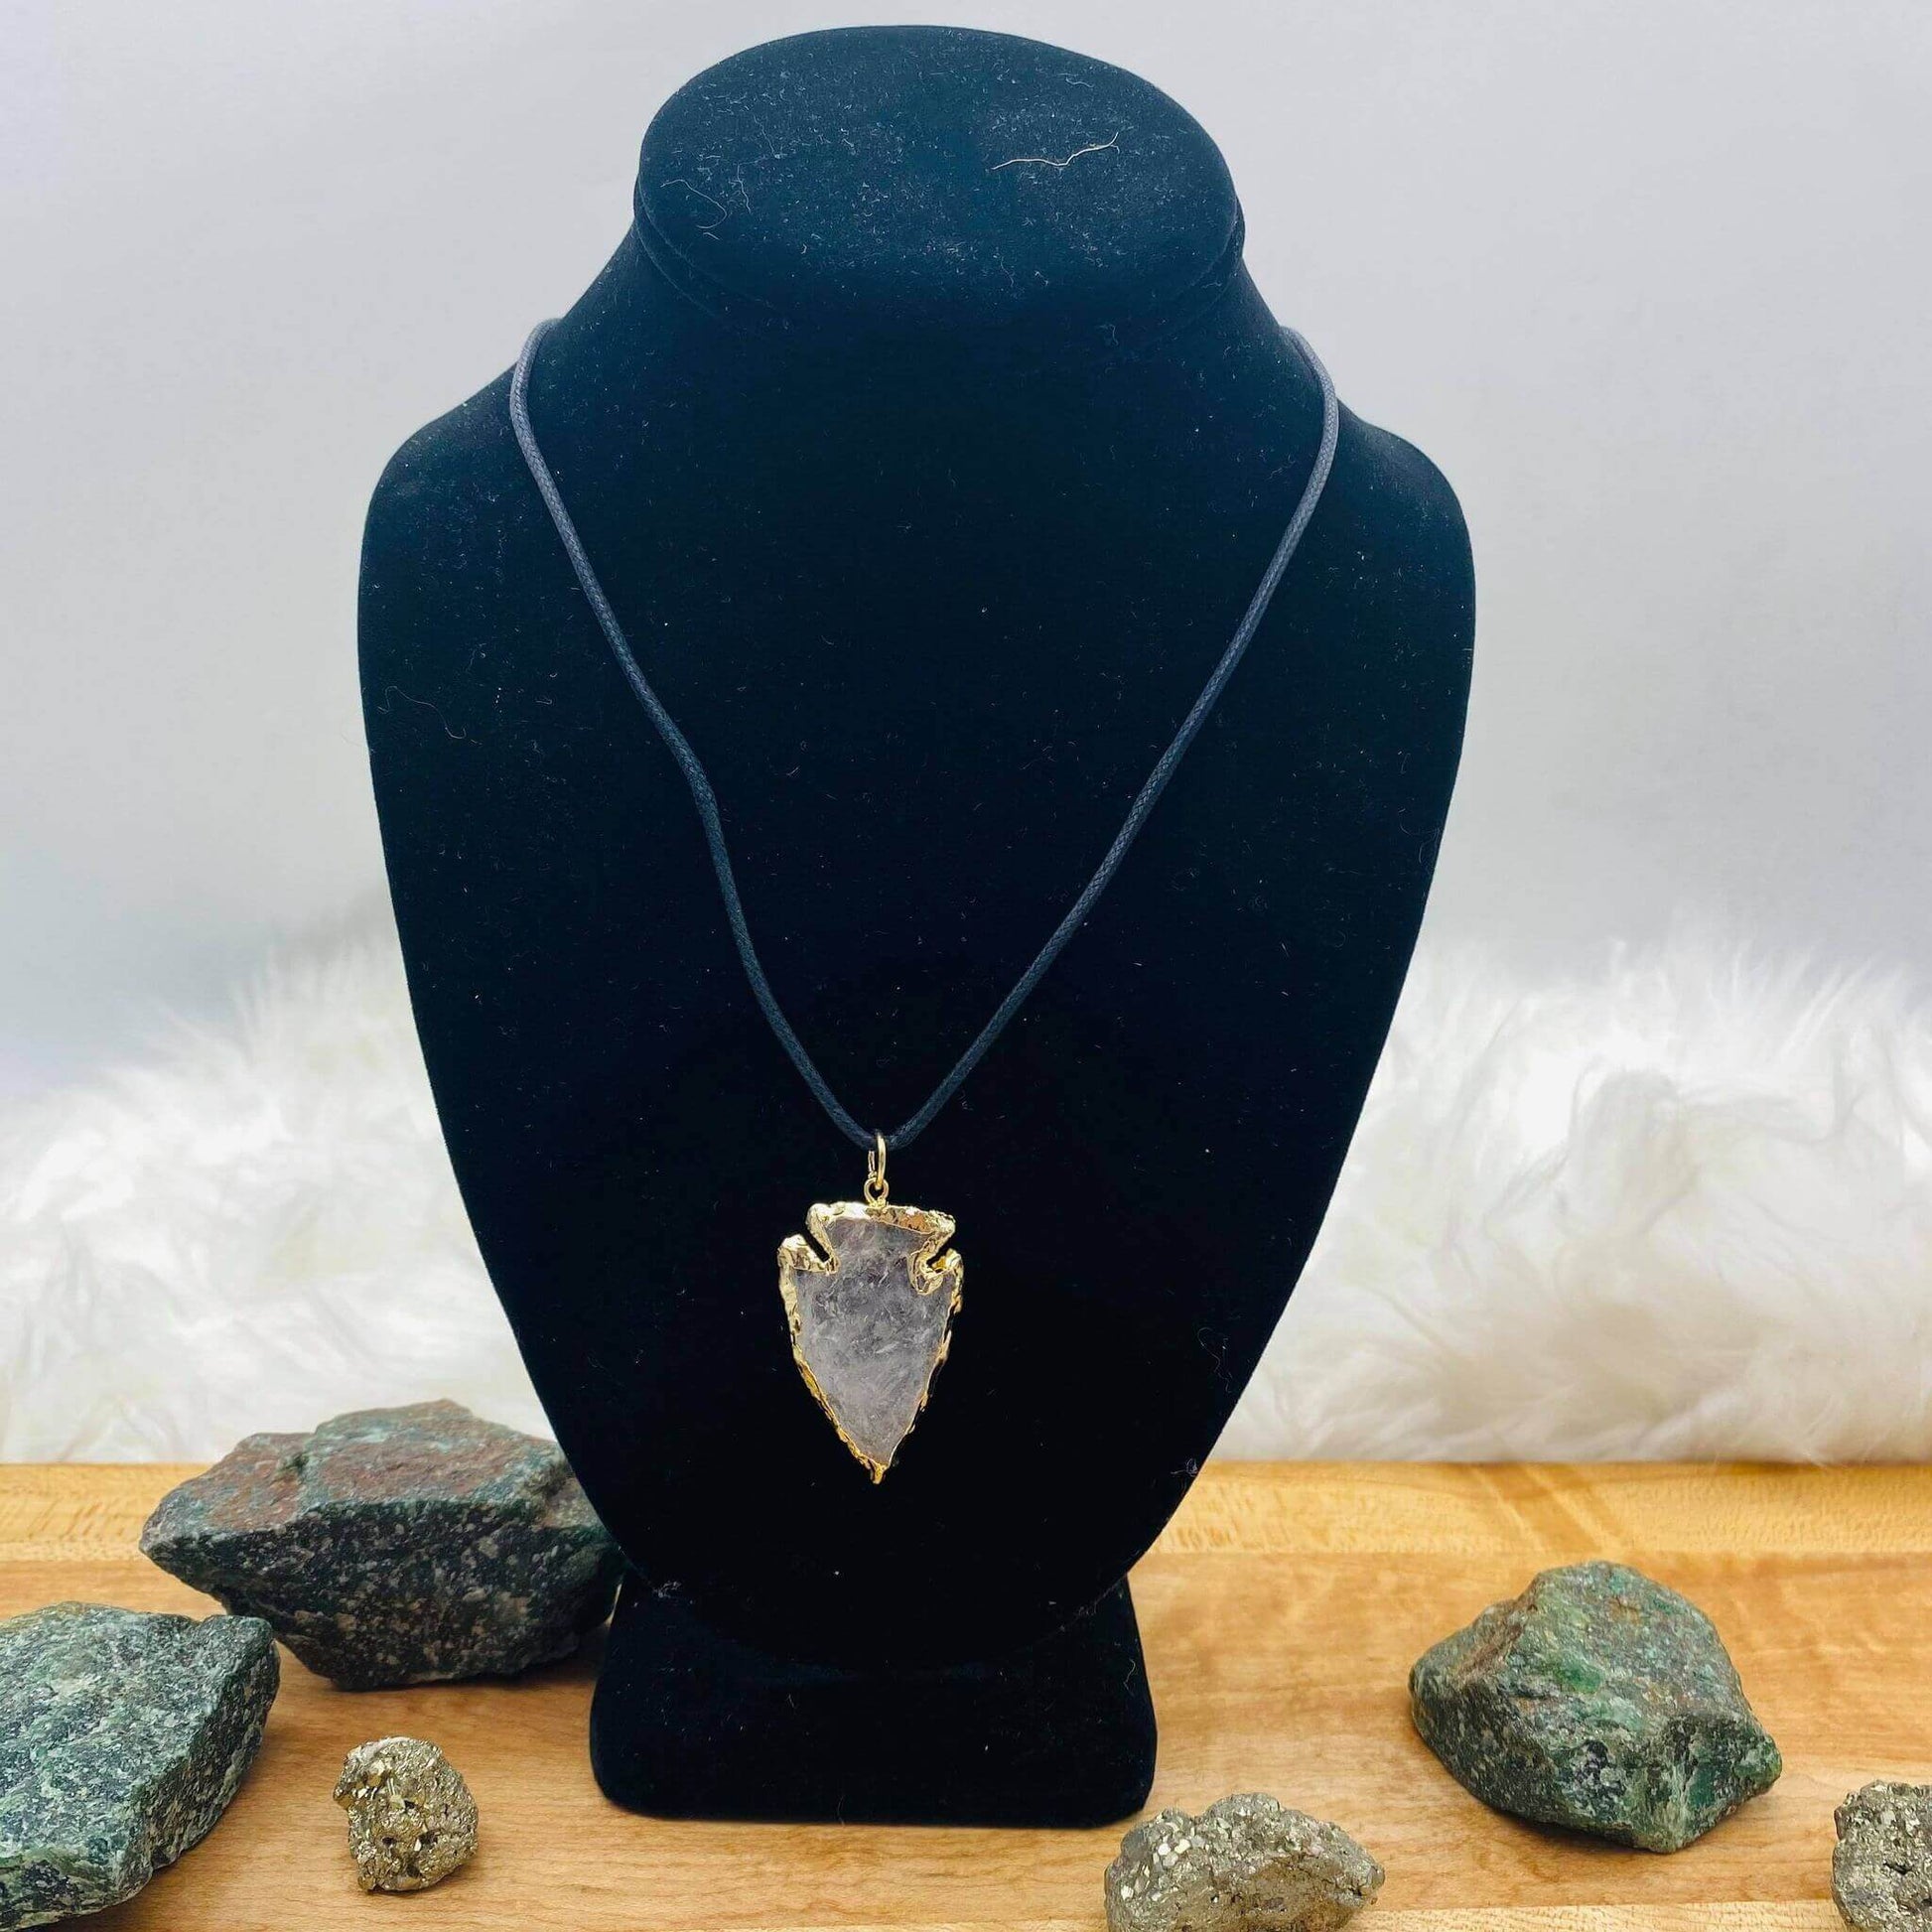 Clear Quartz Arrowhead Necklace at $25 only from Spiral Rain